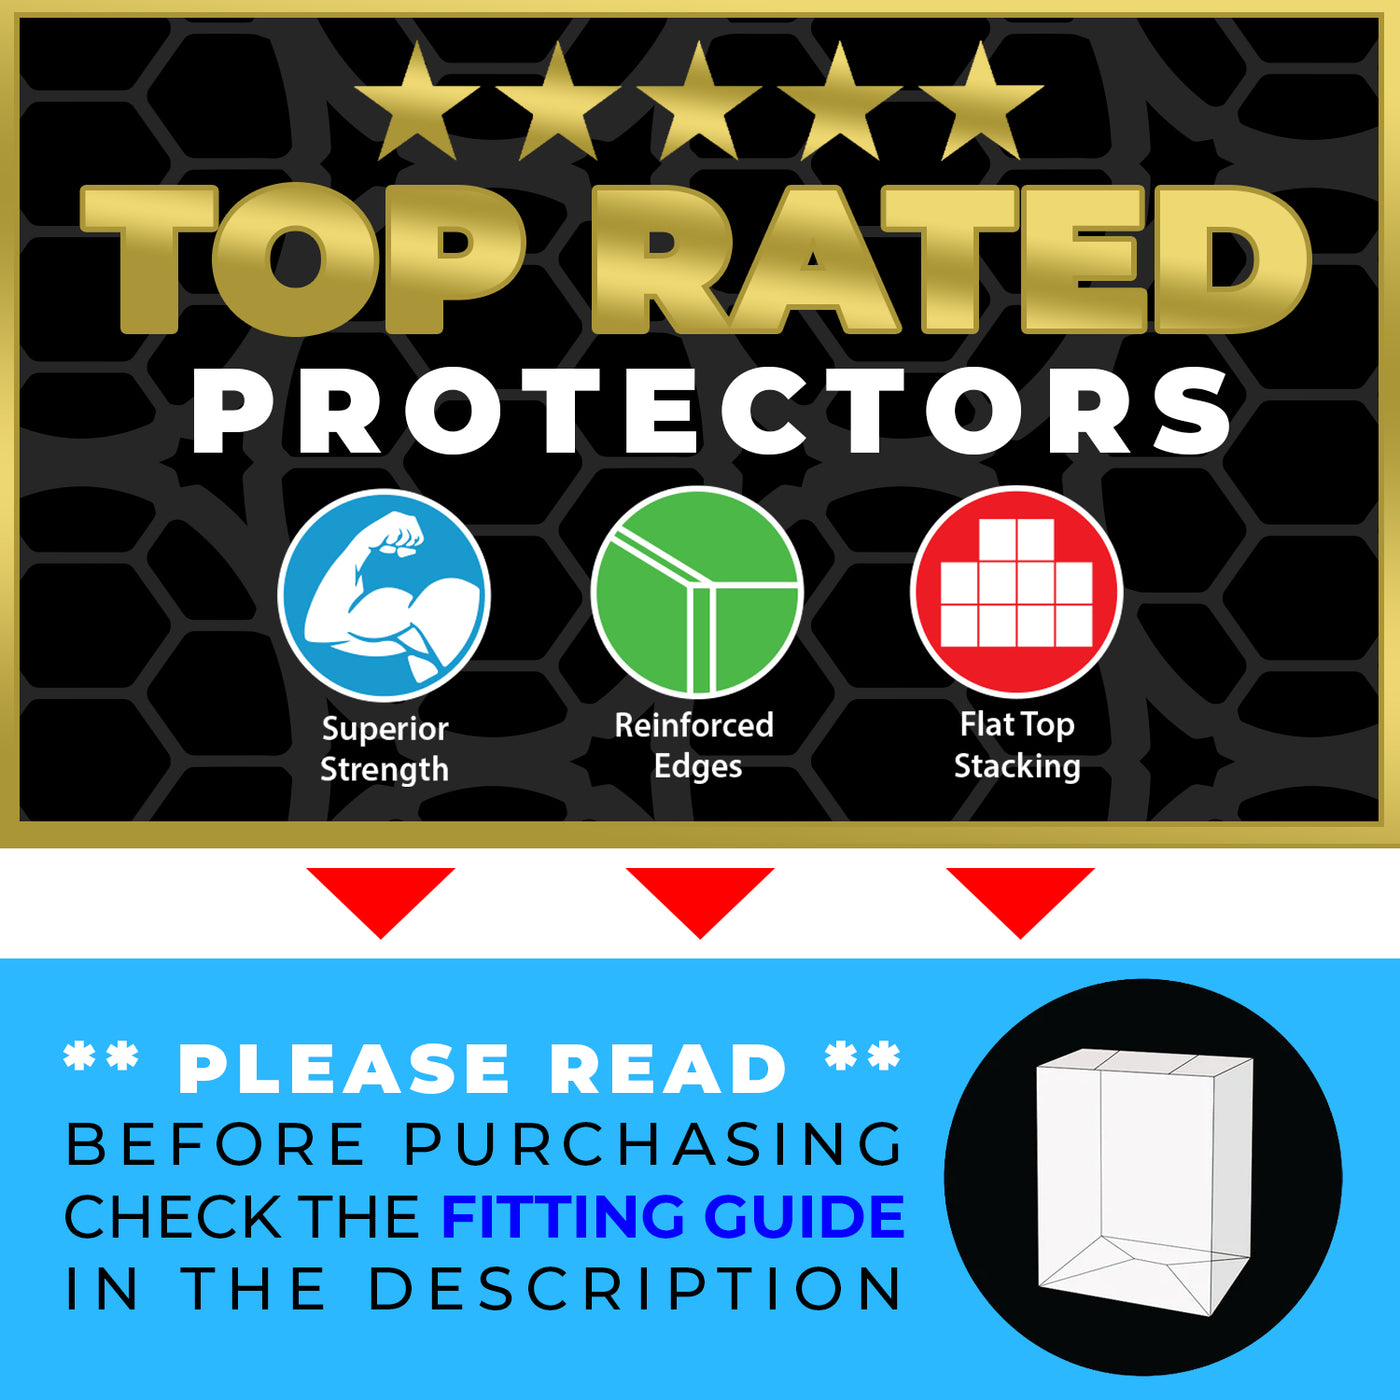 7 pack best funko pop protectors thick strong uv scratch flat top stack vinyl display geek plastic shield vaulted eco armor fits collect protect display case kollector protector